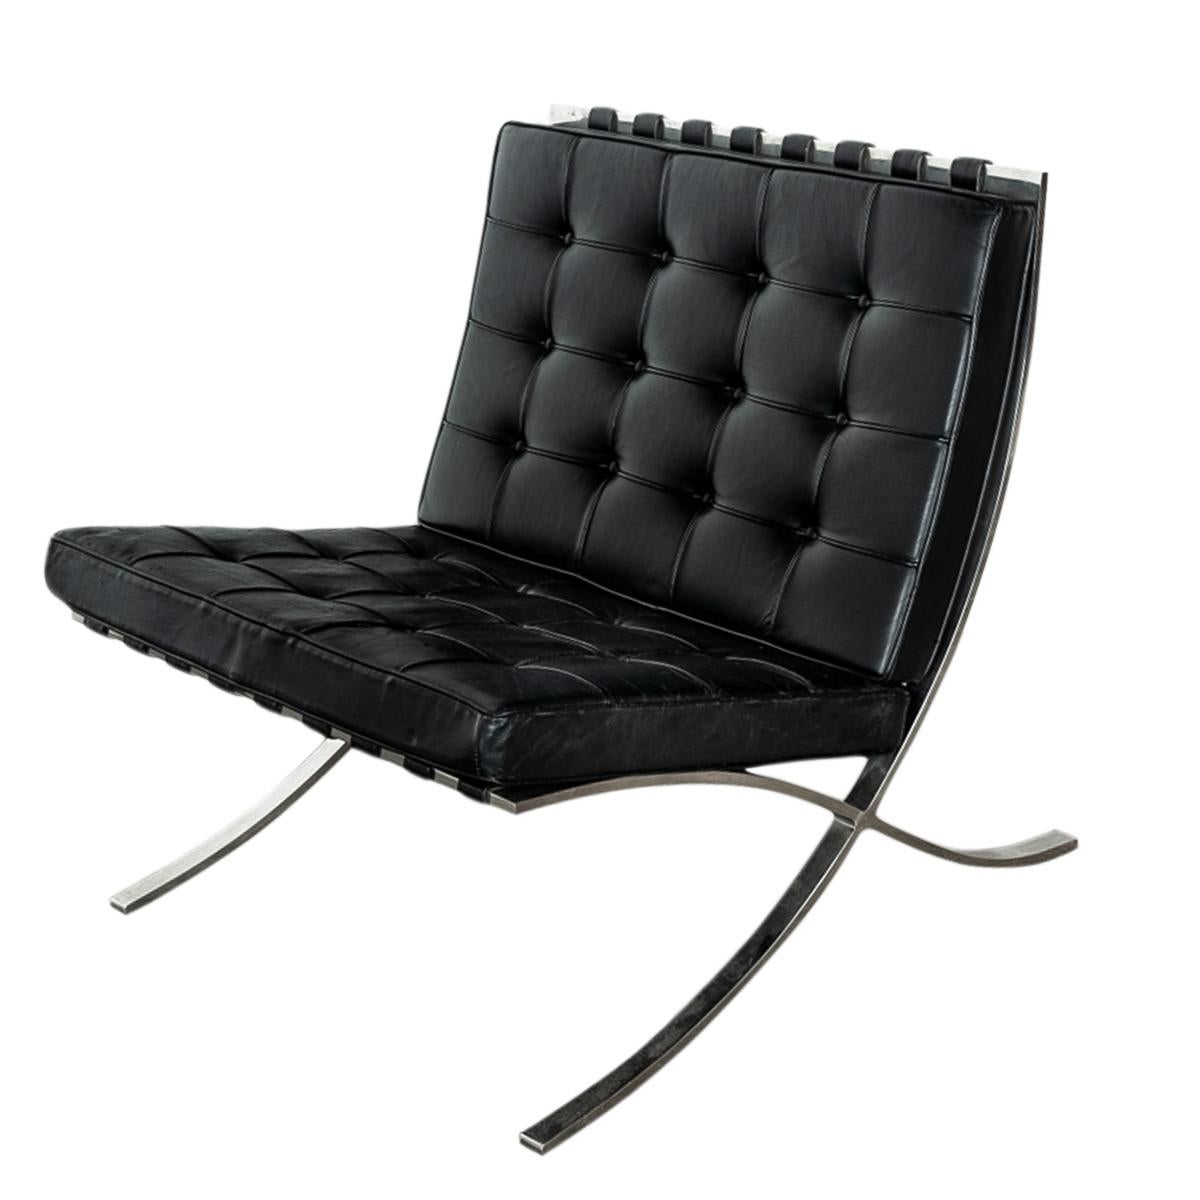 Early Pair MCM Knoll Barcelona Chairs Black Leather Mies van der Rohe 1961 For Sale 1